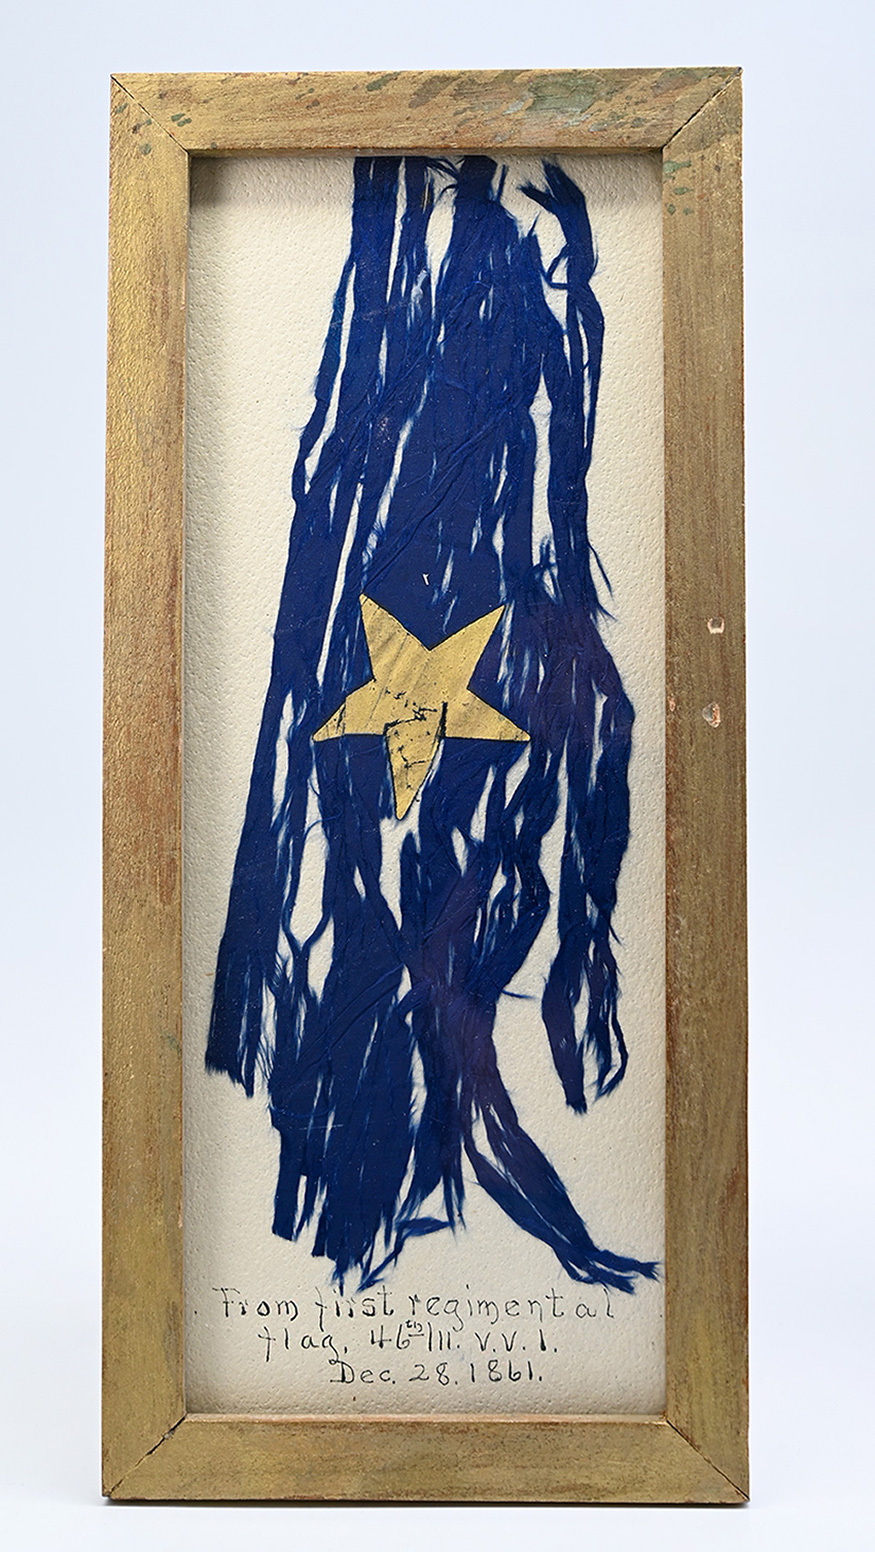 PIECE OF THE 46th ILLINOIS BATTLE FLAG PRESERVED AND TAGGED BY VETERAN BELA St. JOHN 